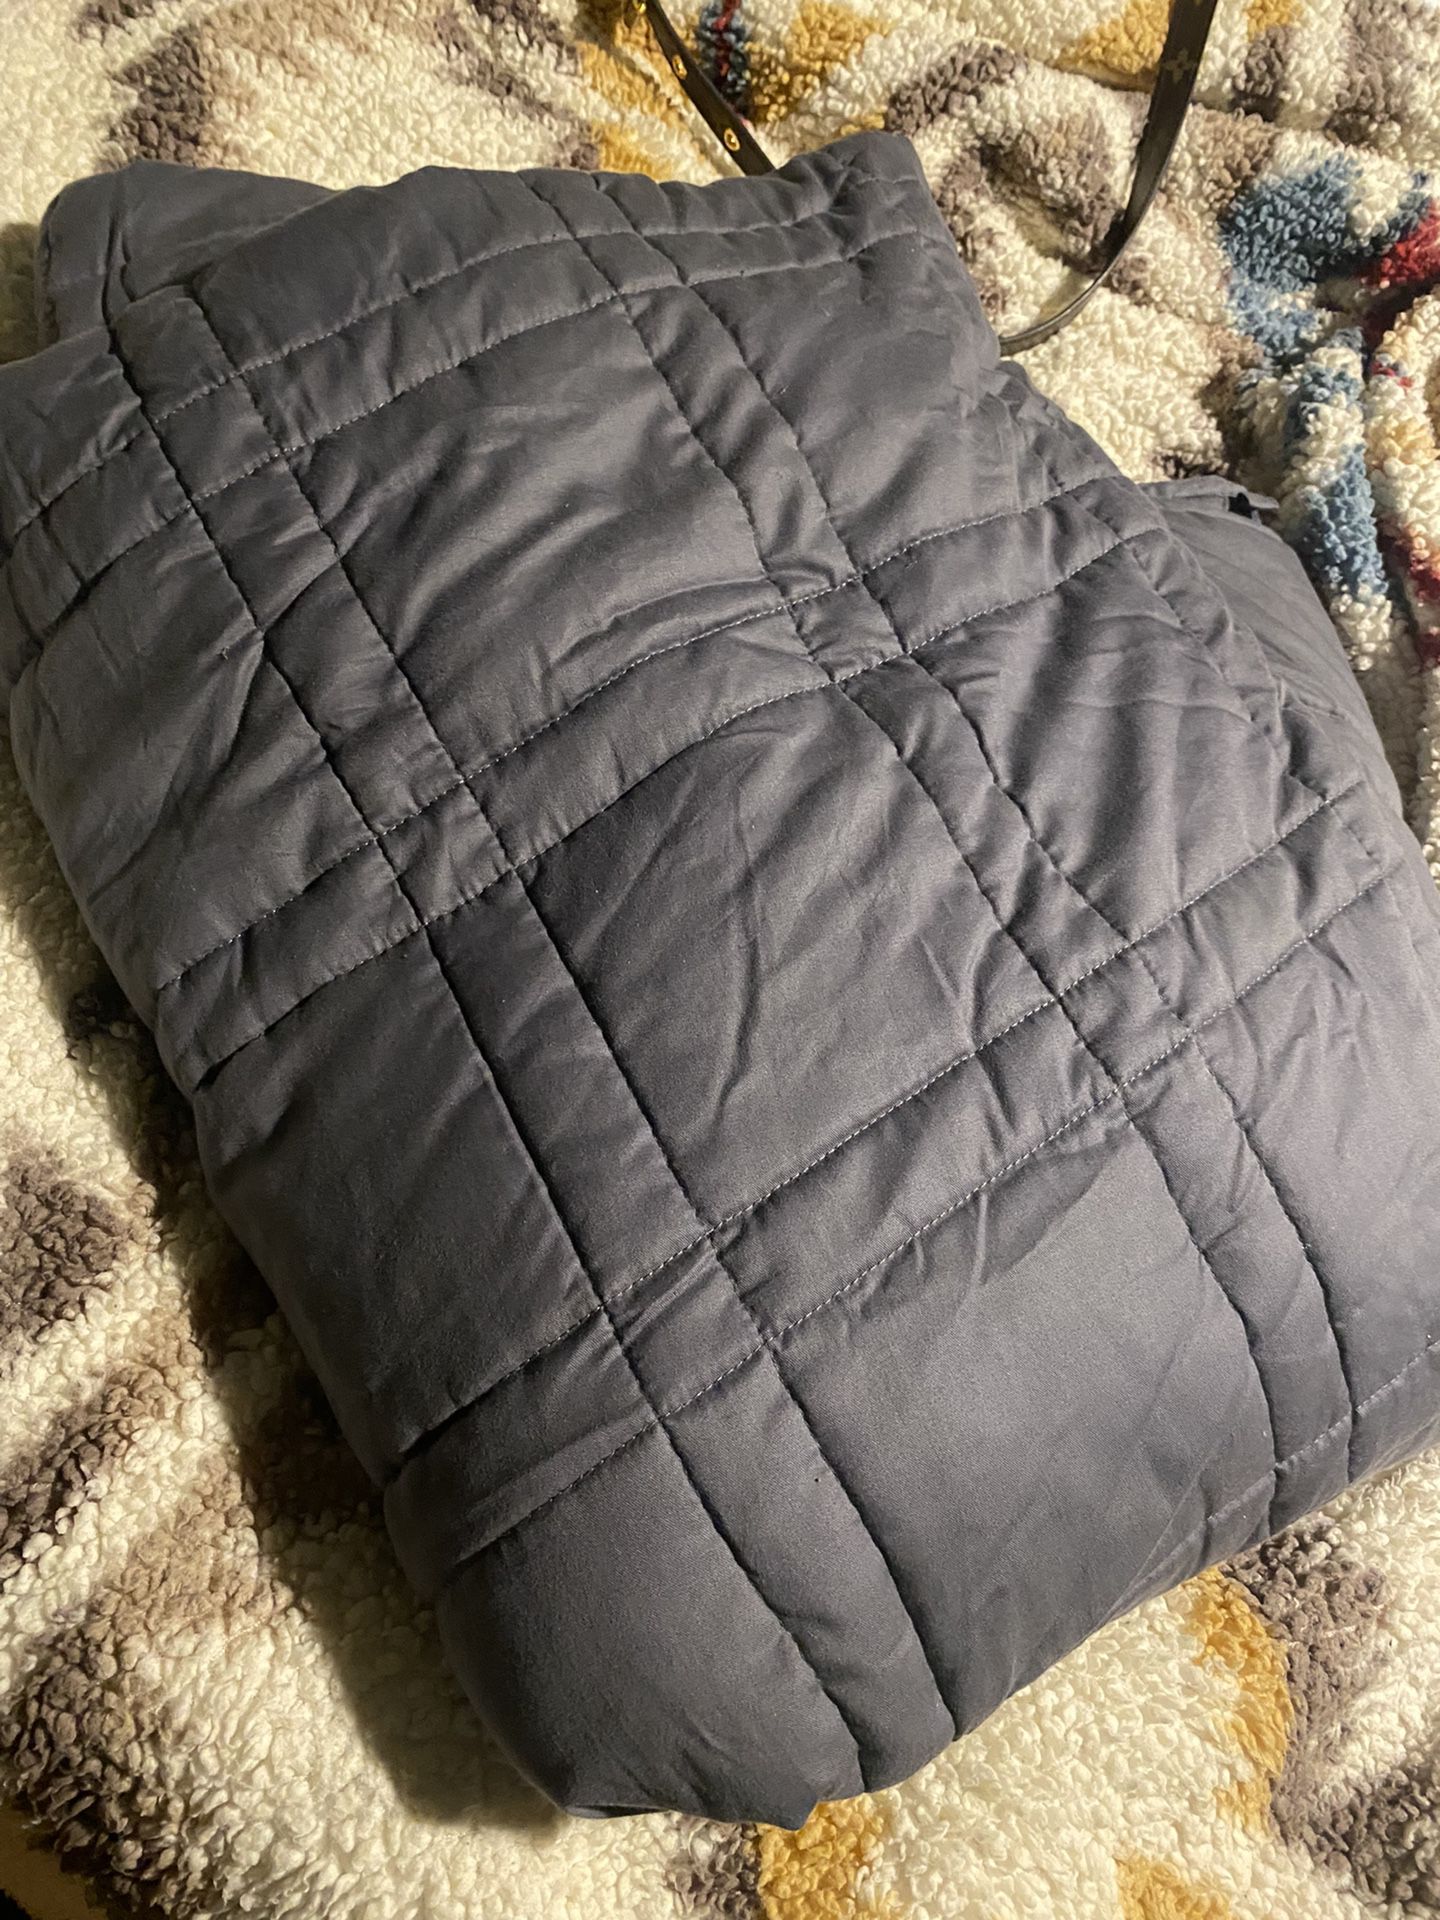 15 Lb Weighted Blanket